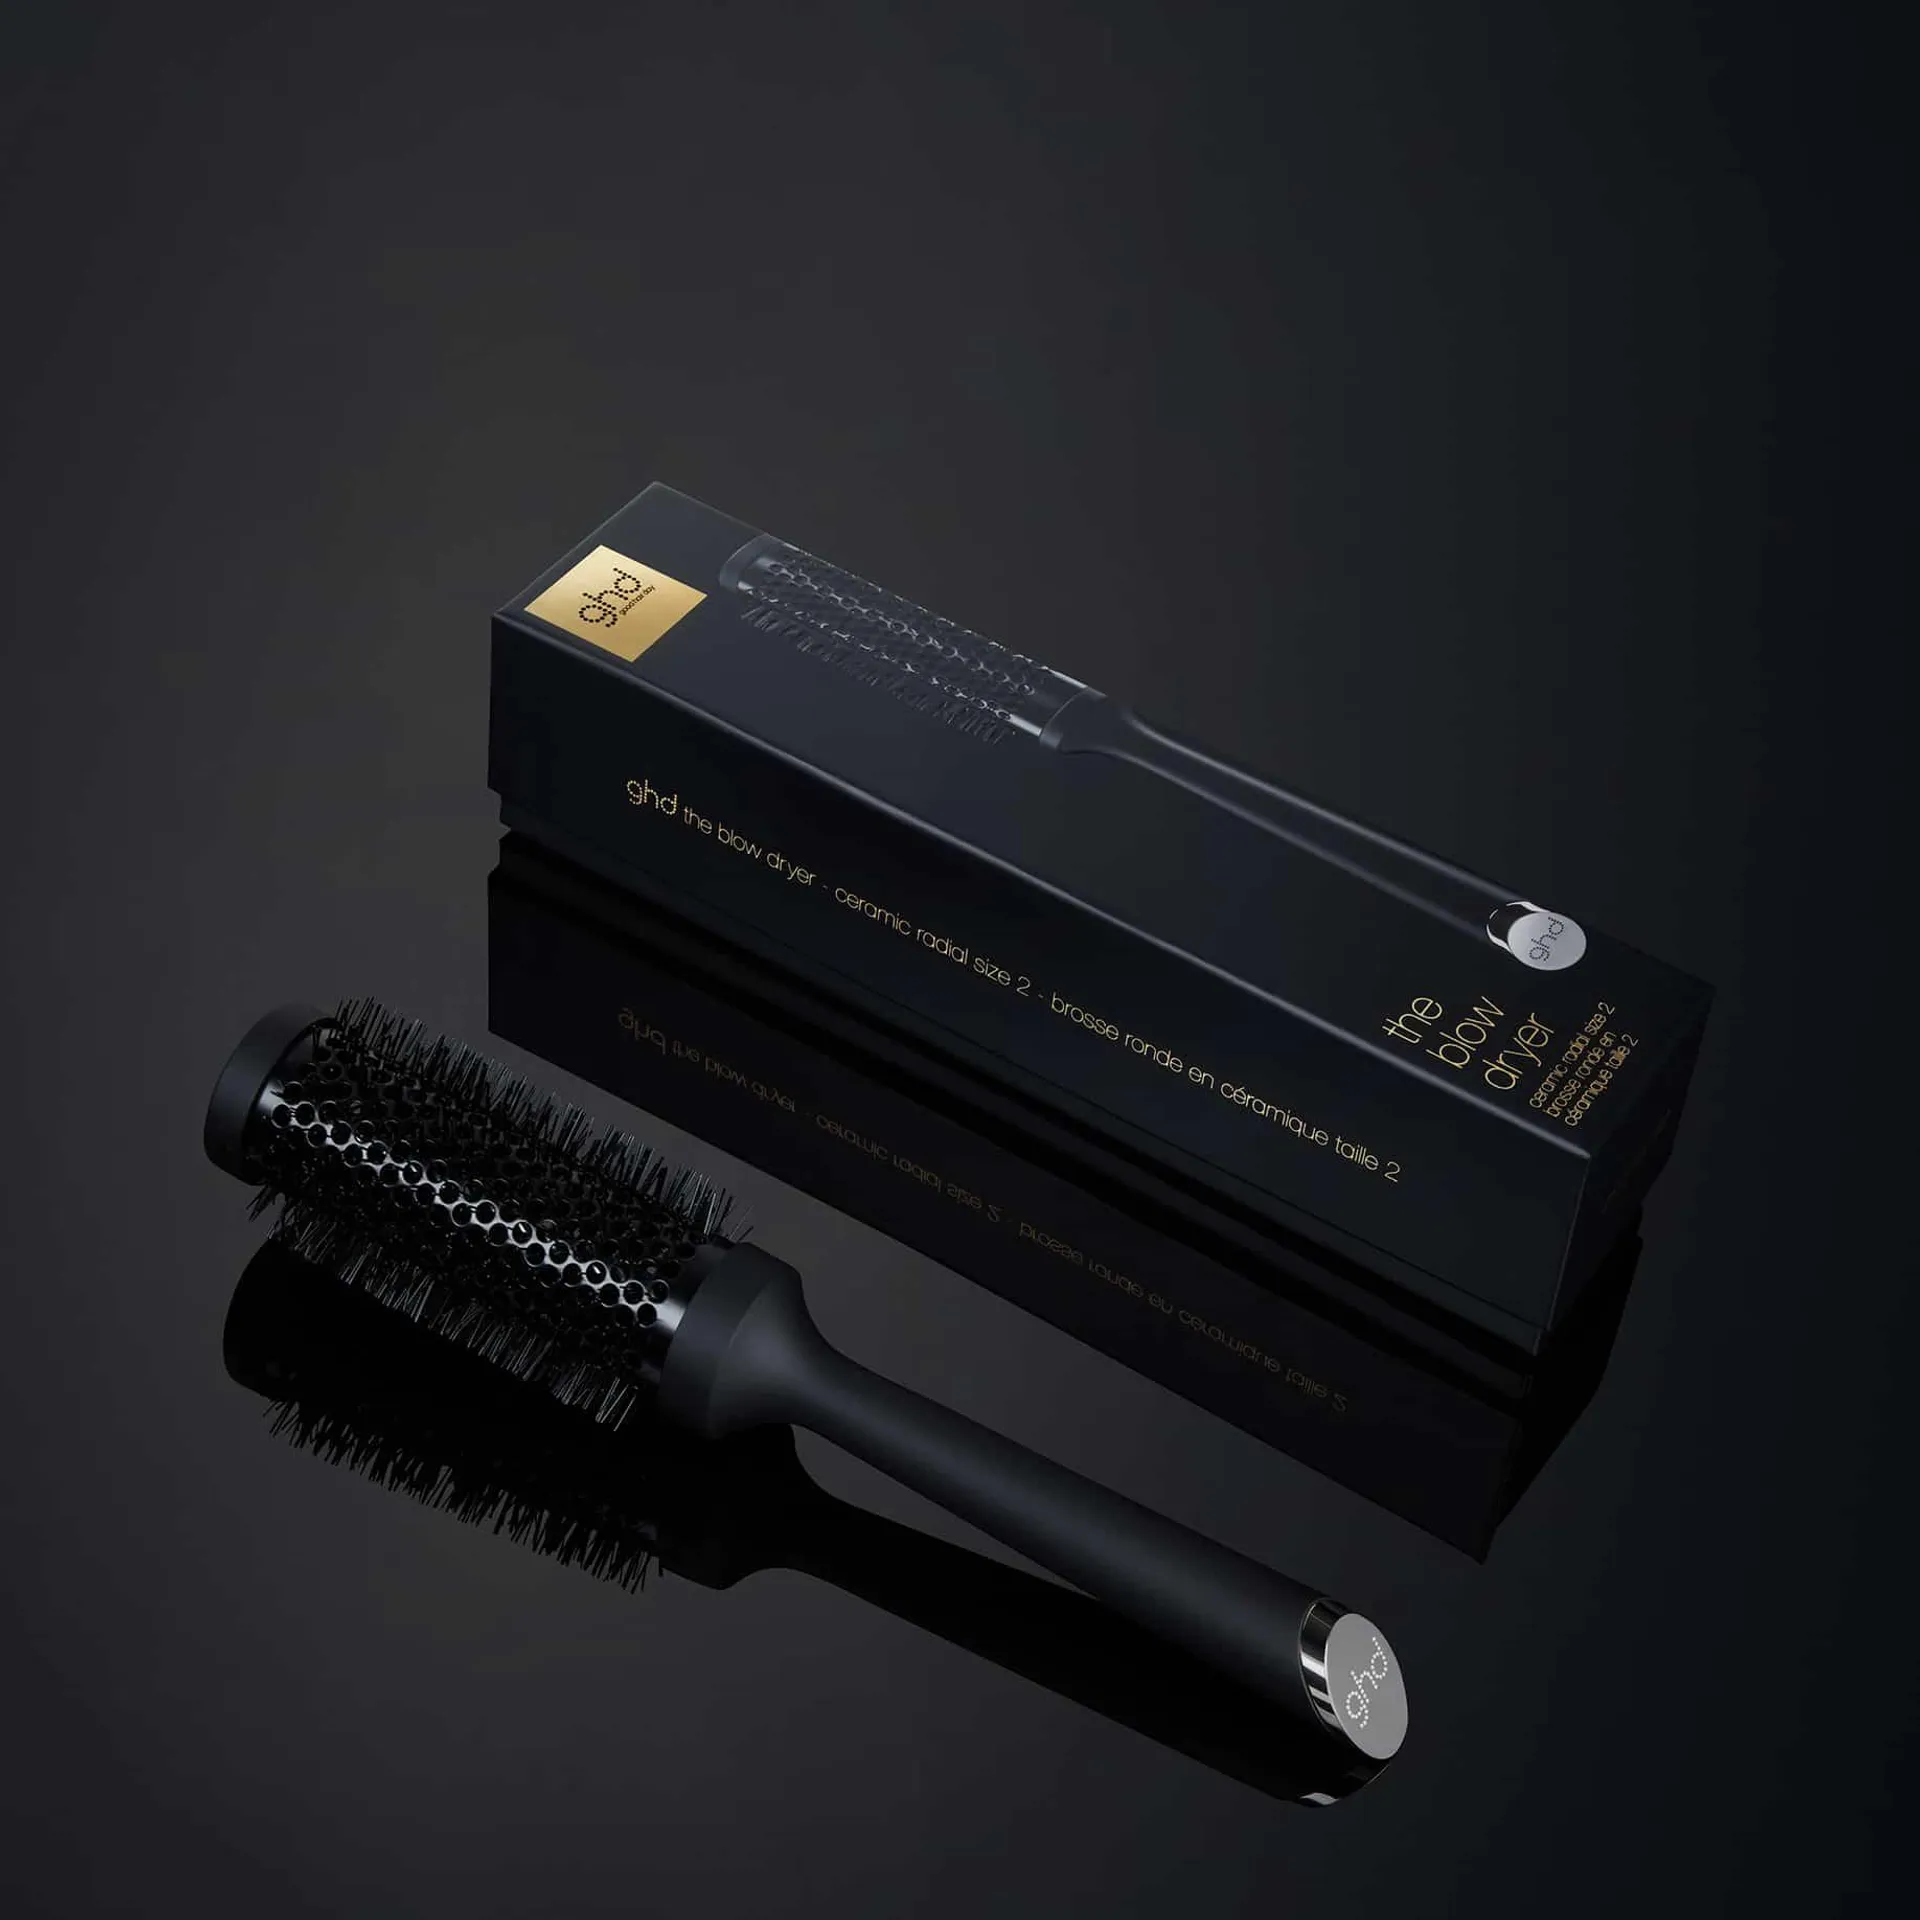 GHD THE BLOW DRYER - RADIAL BRUSH SIZE 2 (35MM BARREL)